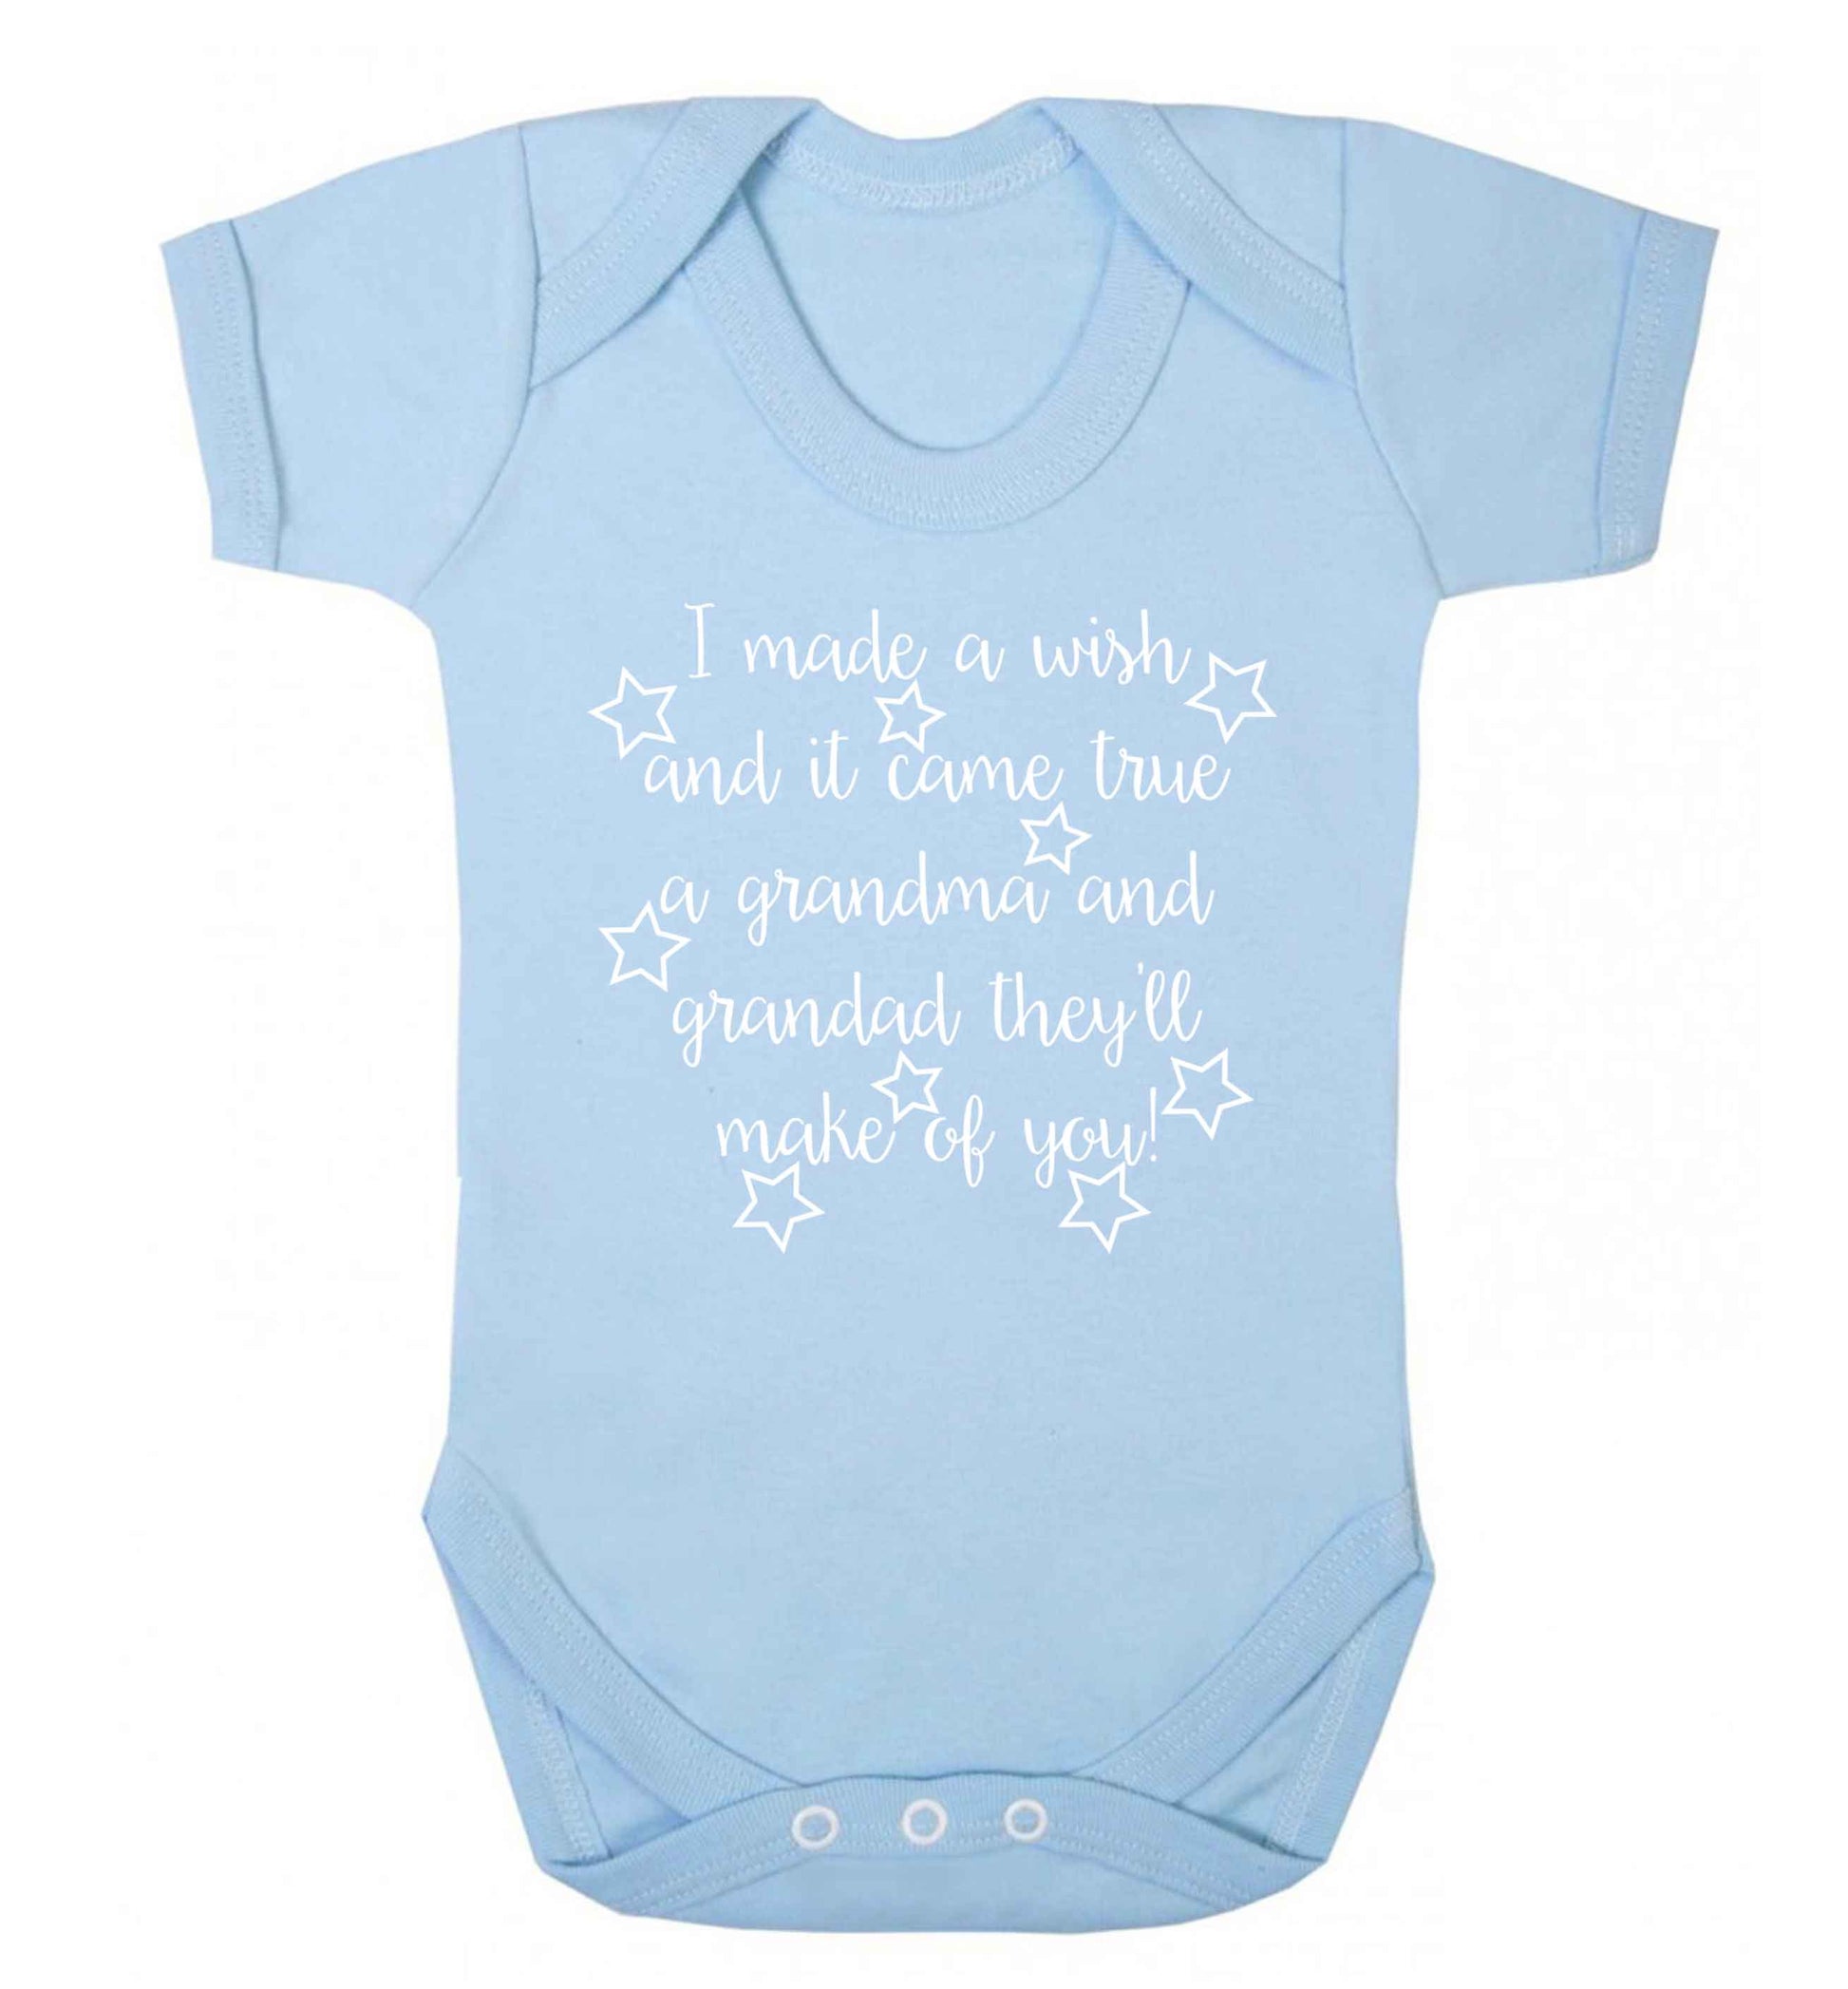 I made a wish and it came true a grandma and grandad they'll make of you! Baby Vest pale blue 18-24 months